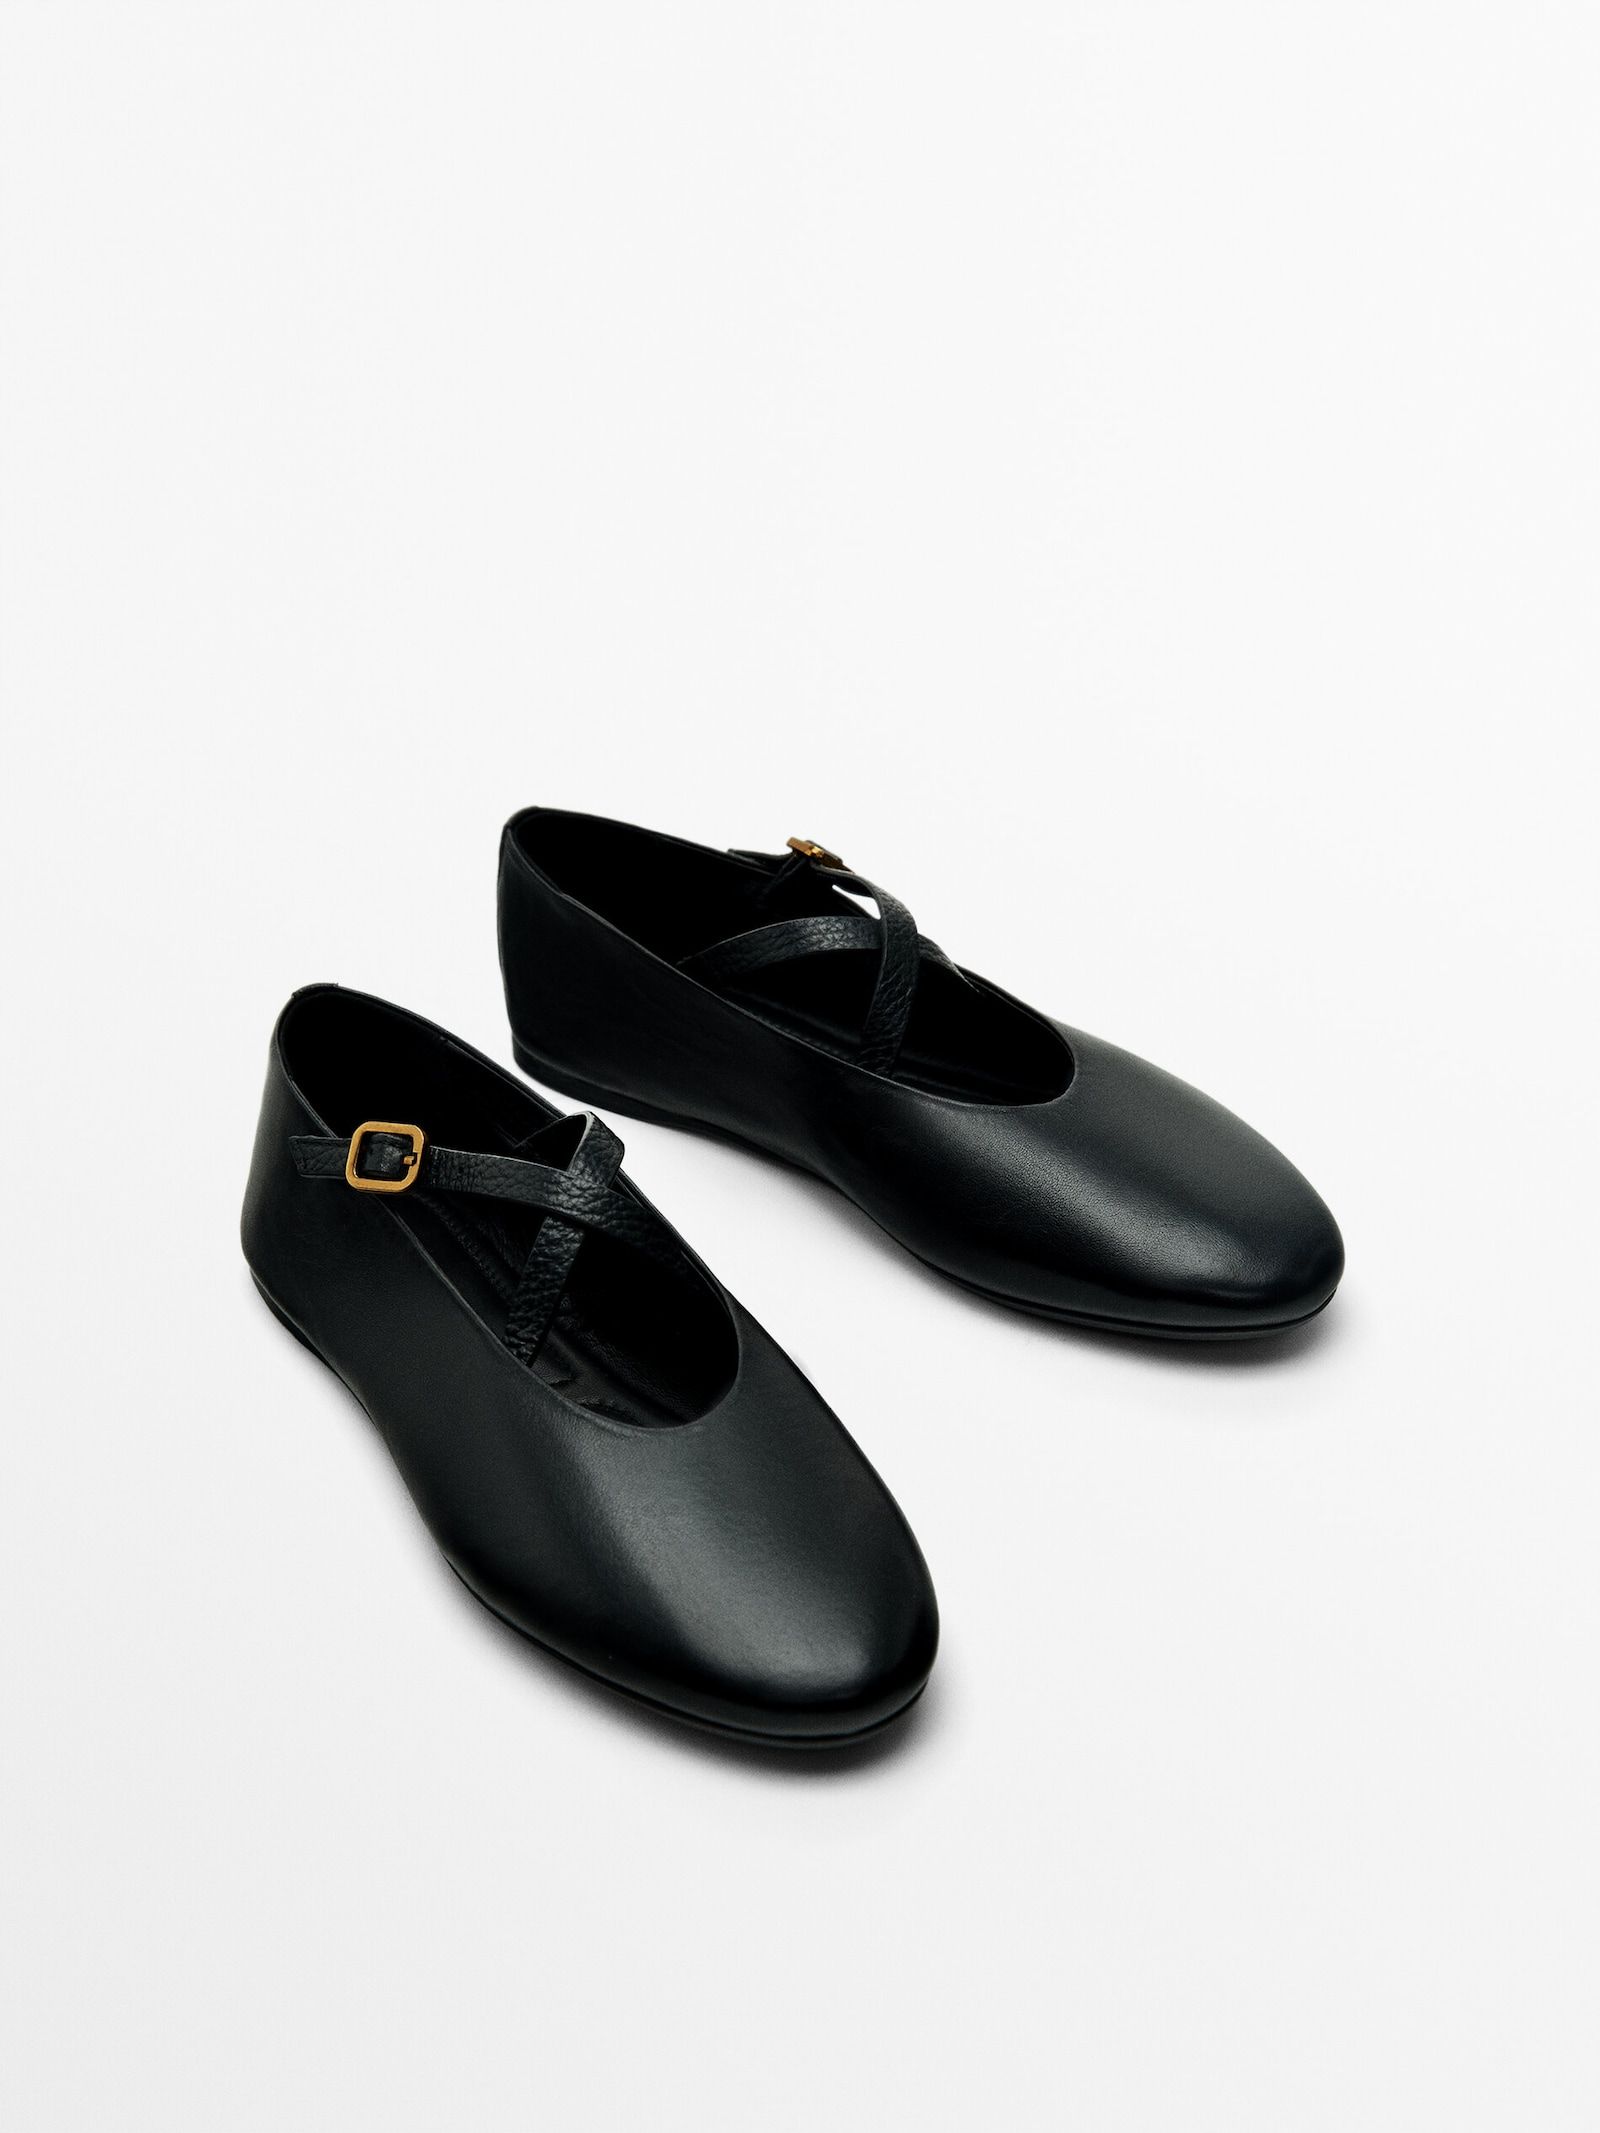 Ballet flats with crossover straps | Massimo Dutti UK